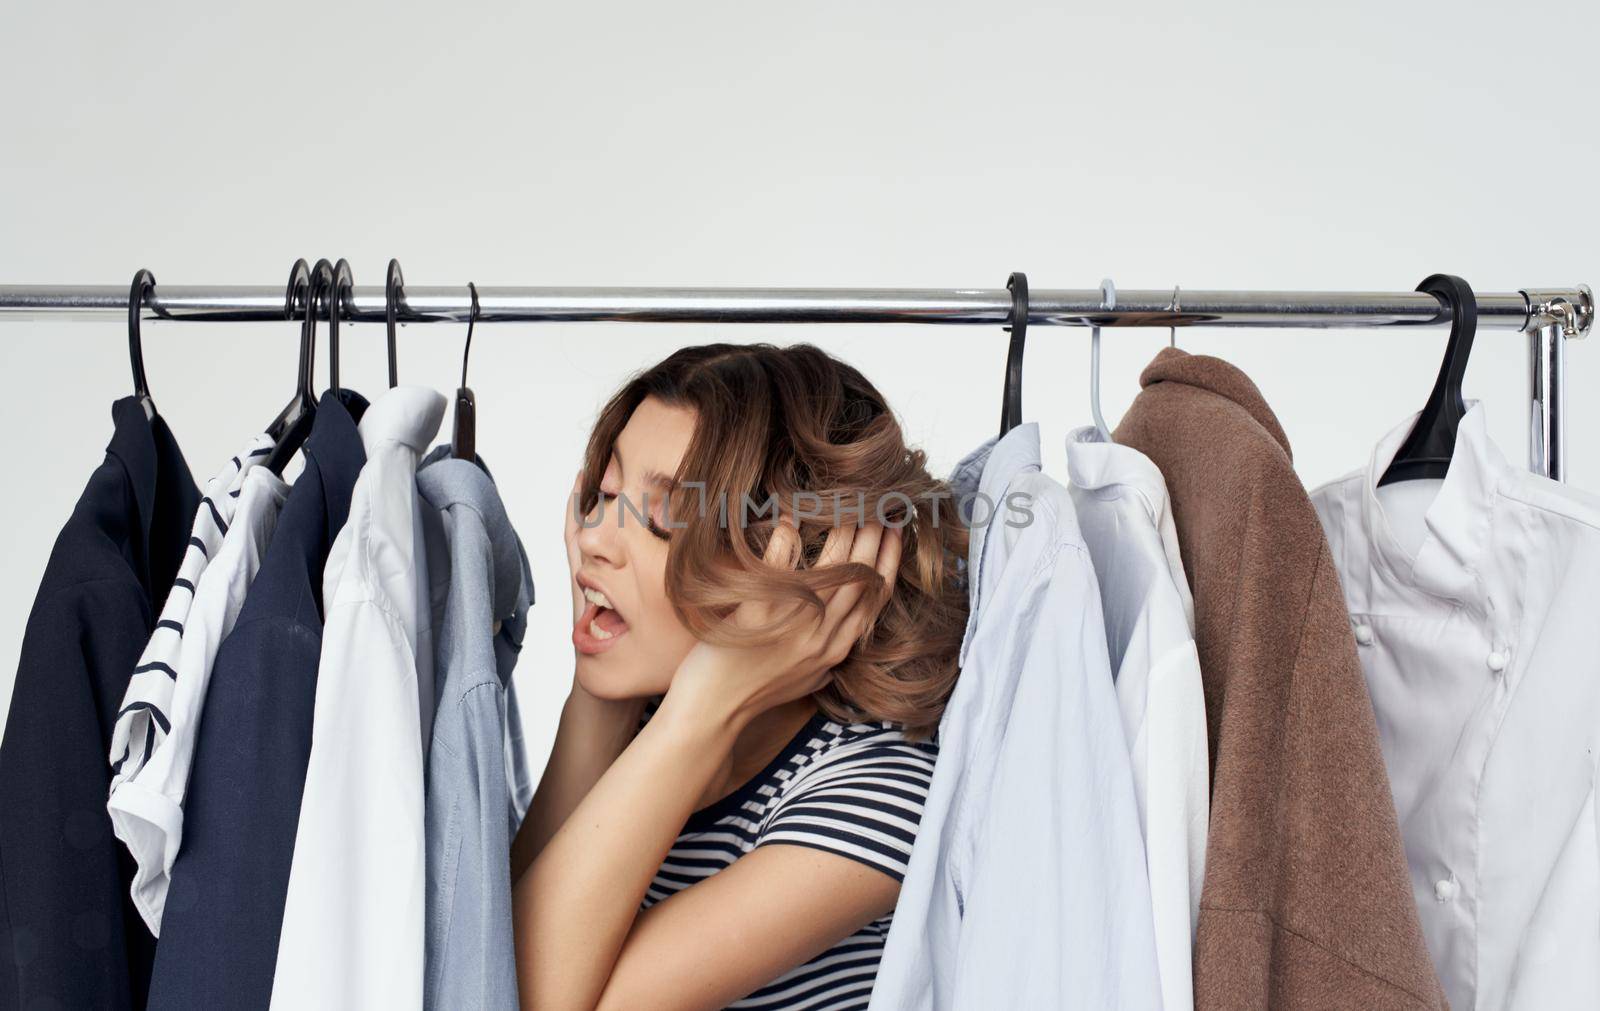 Woman in fitting room with clothes in hand shopping shirt by SHOTPRIME